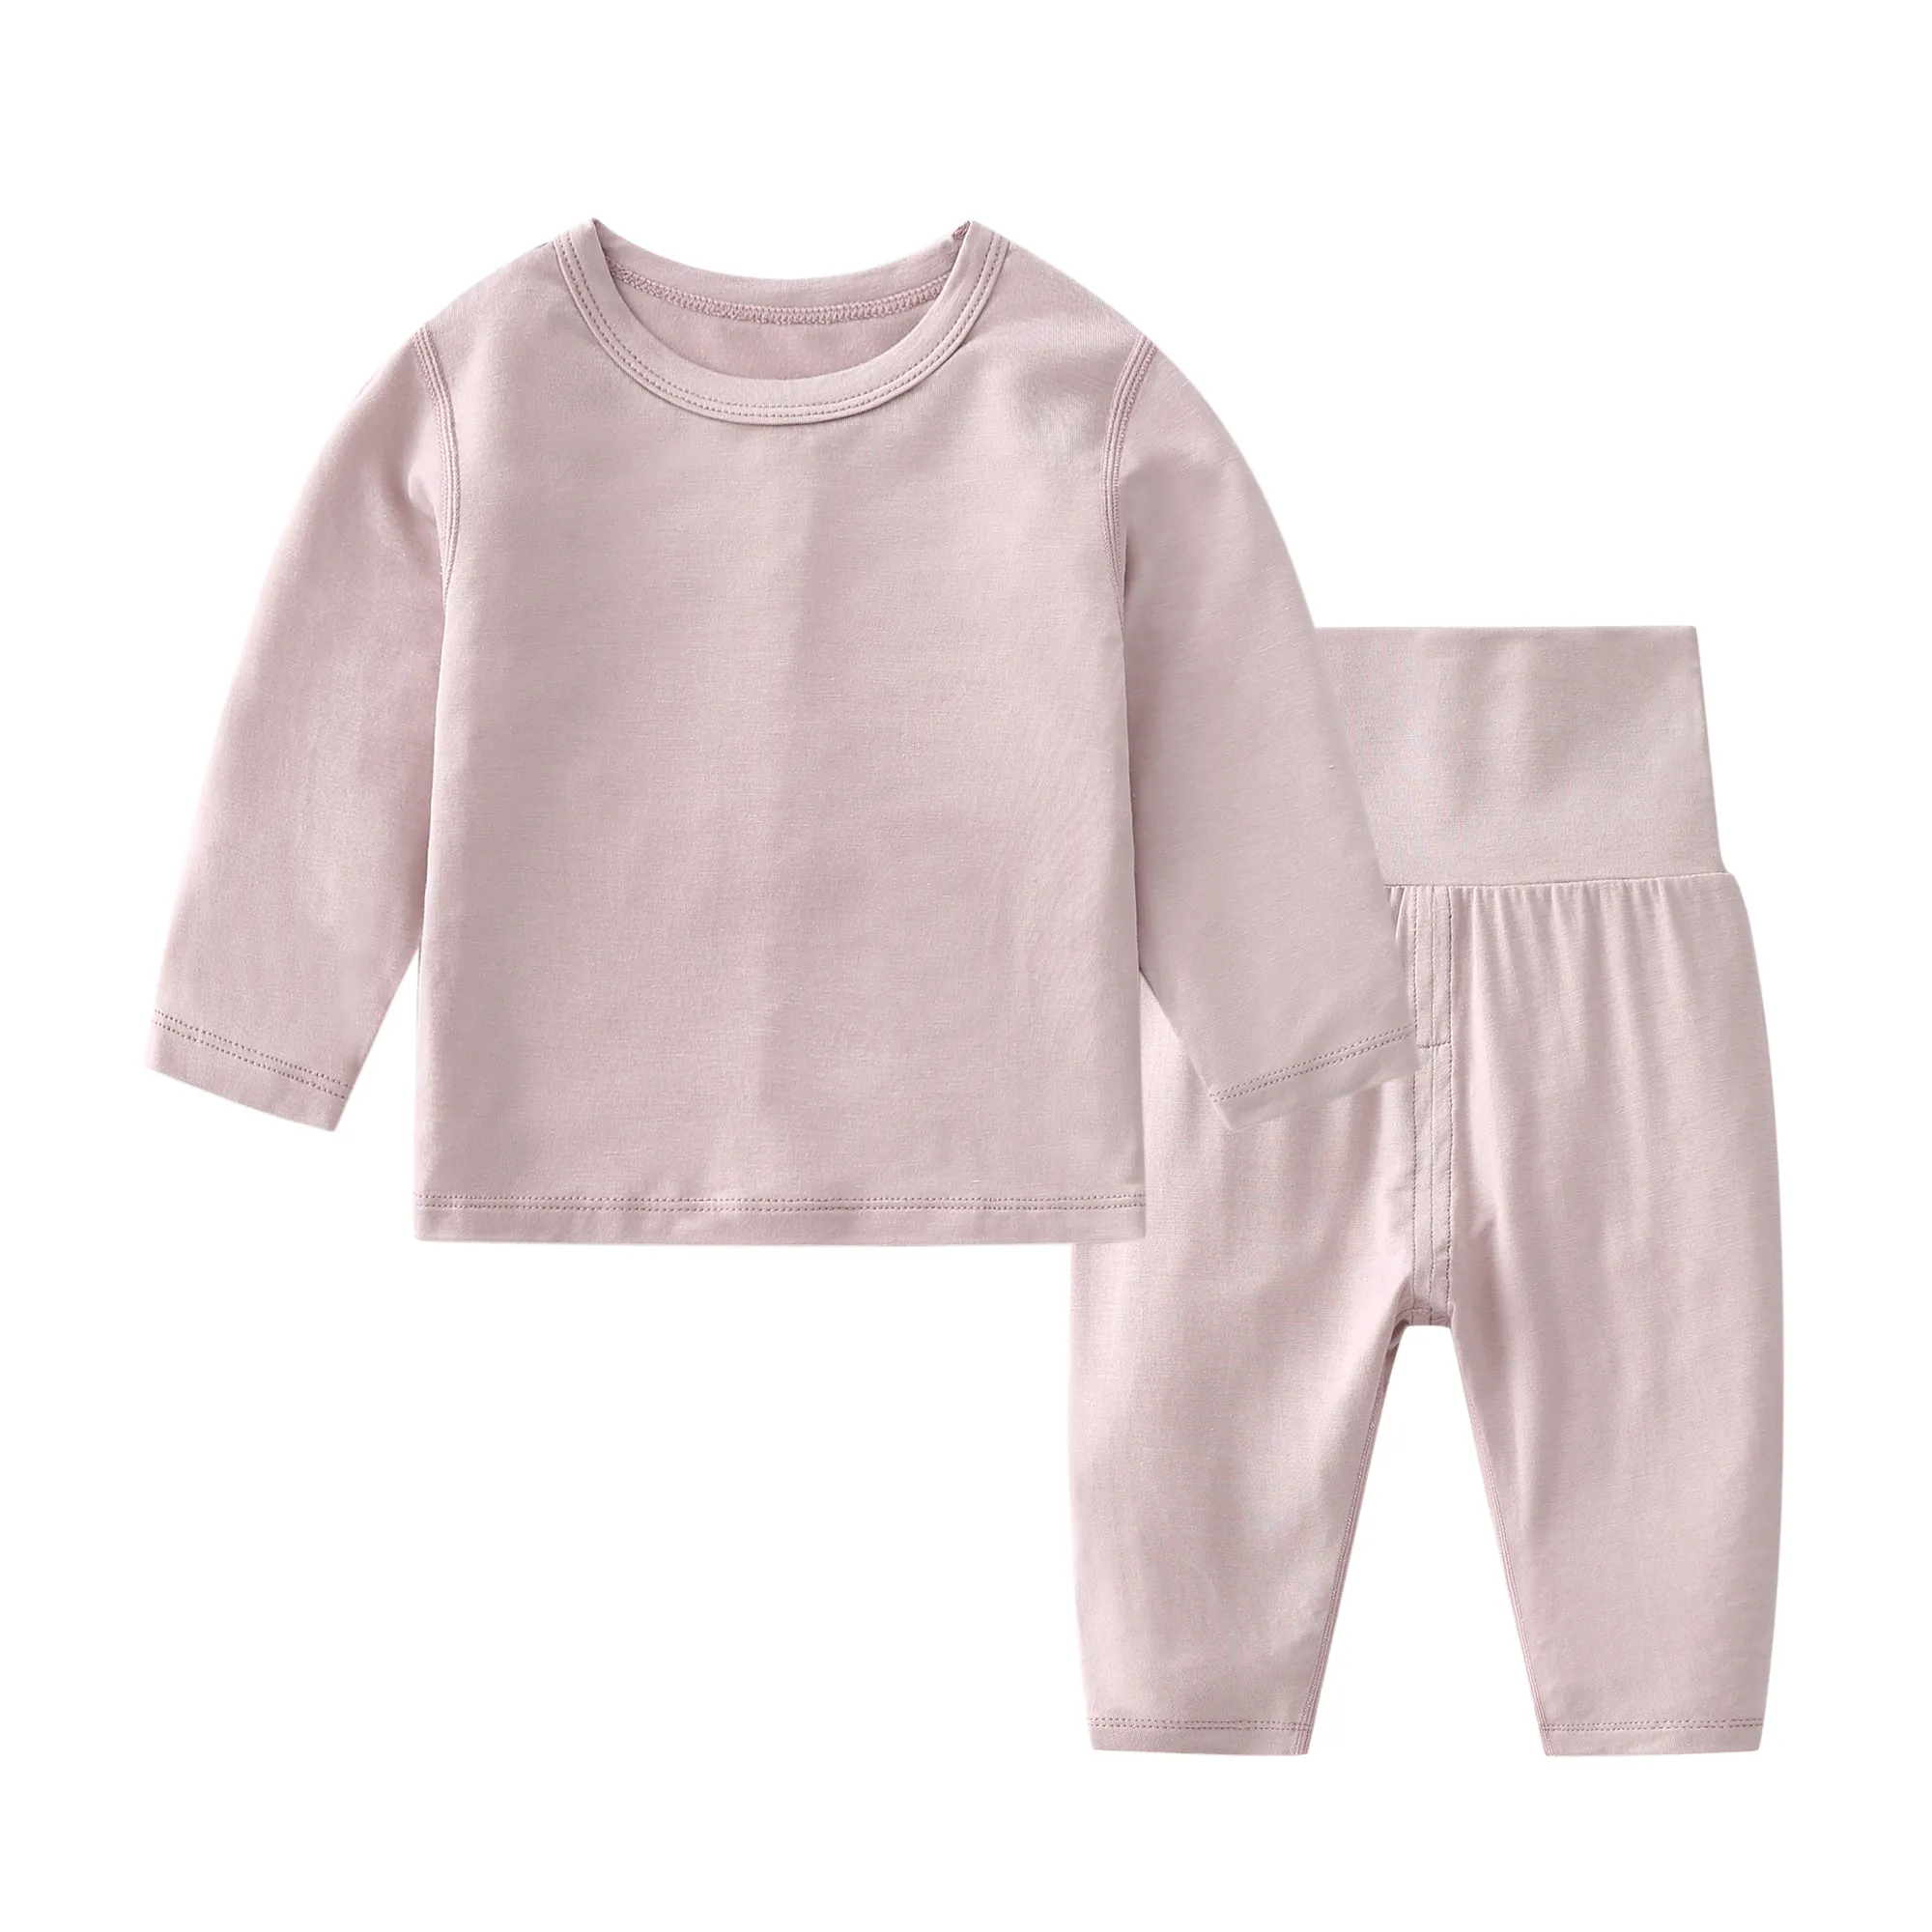 Wholesale baby autumn clothes baby pajamas set winter base layer ultra thin baby clothes